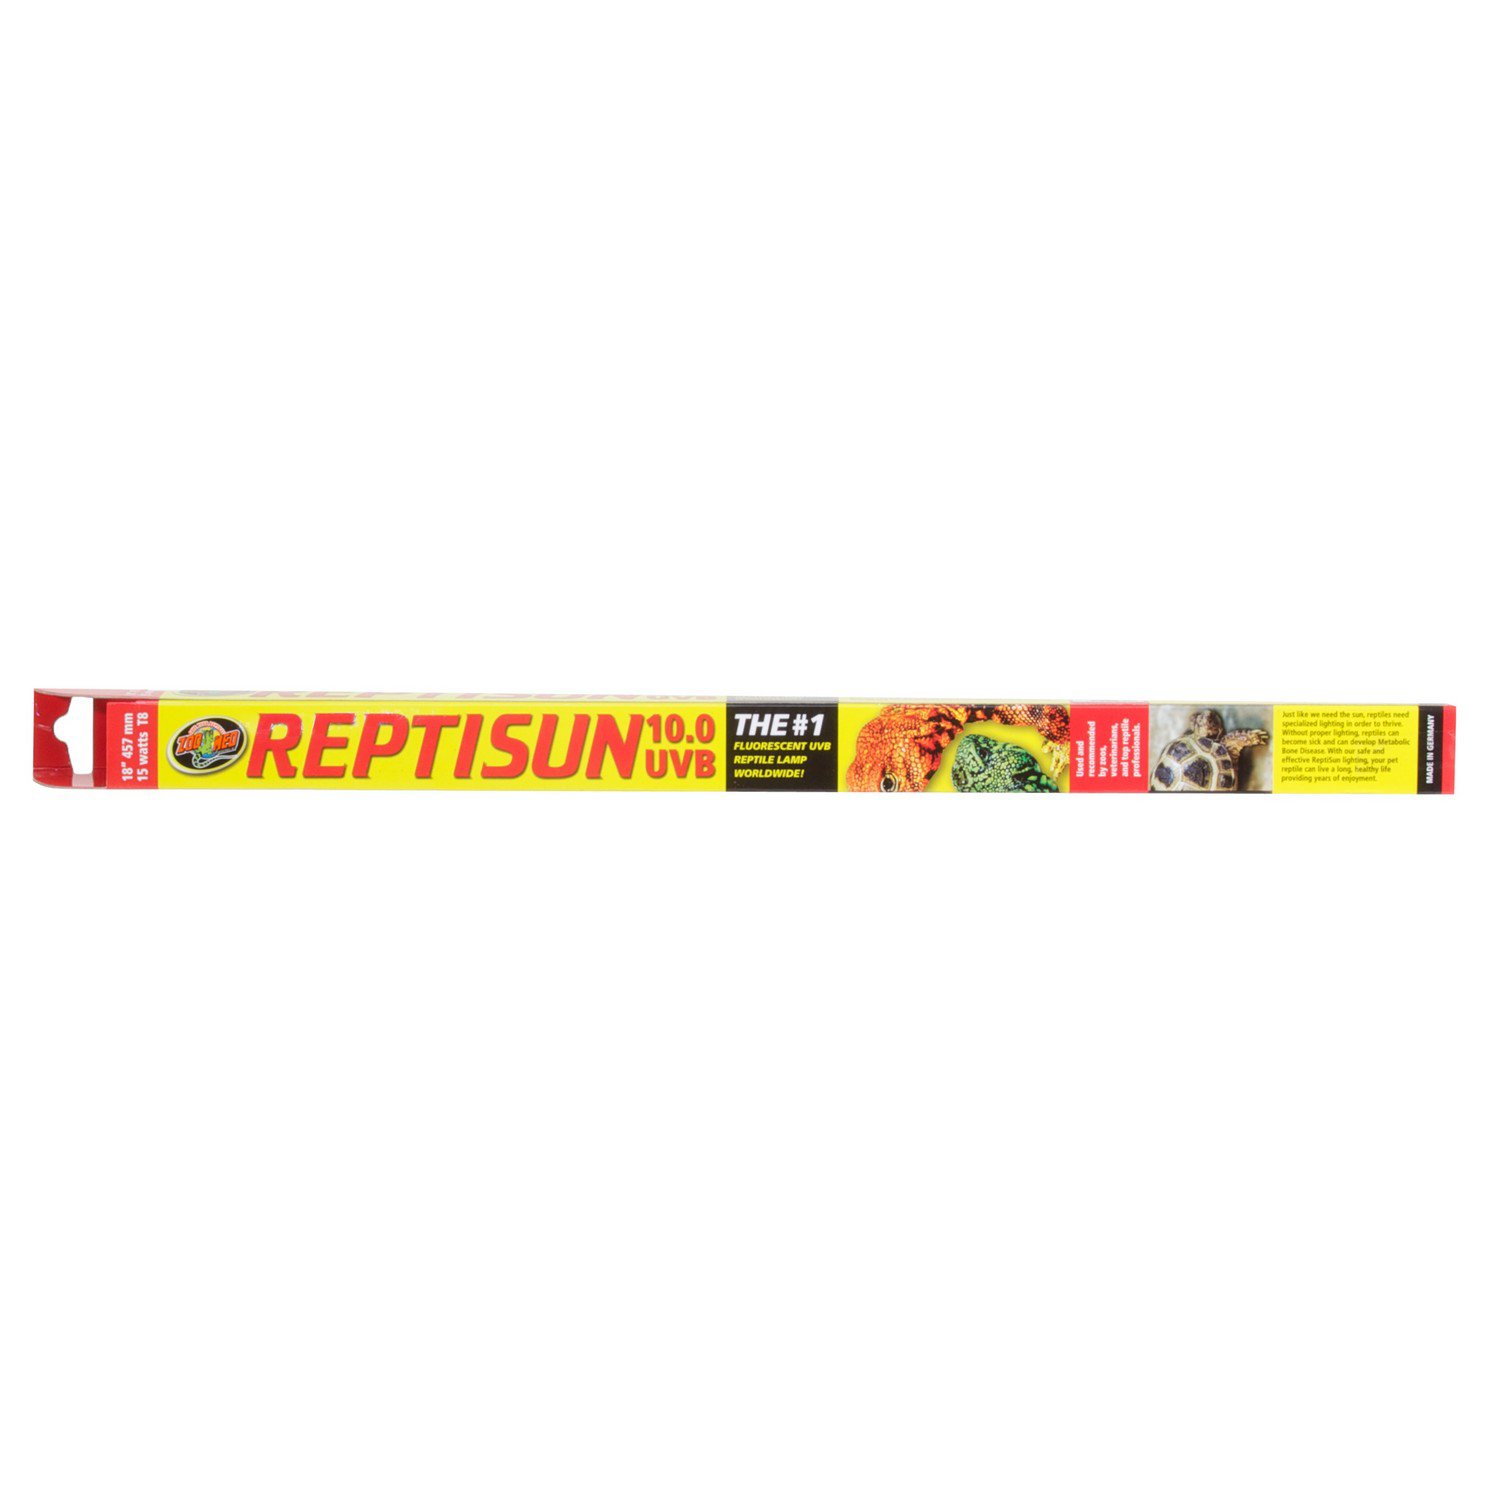 Zoo Med T8 ReptiSun 10.0 UVB Fluorescent Bulbs in 4 sizes